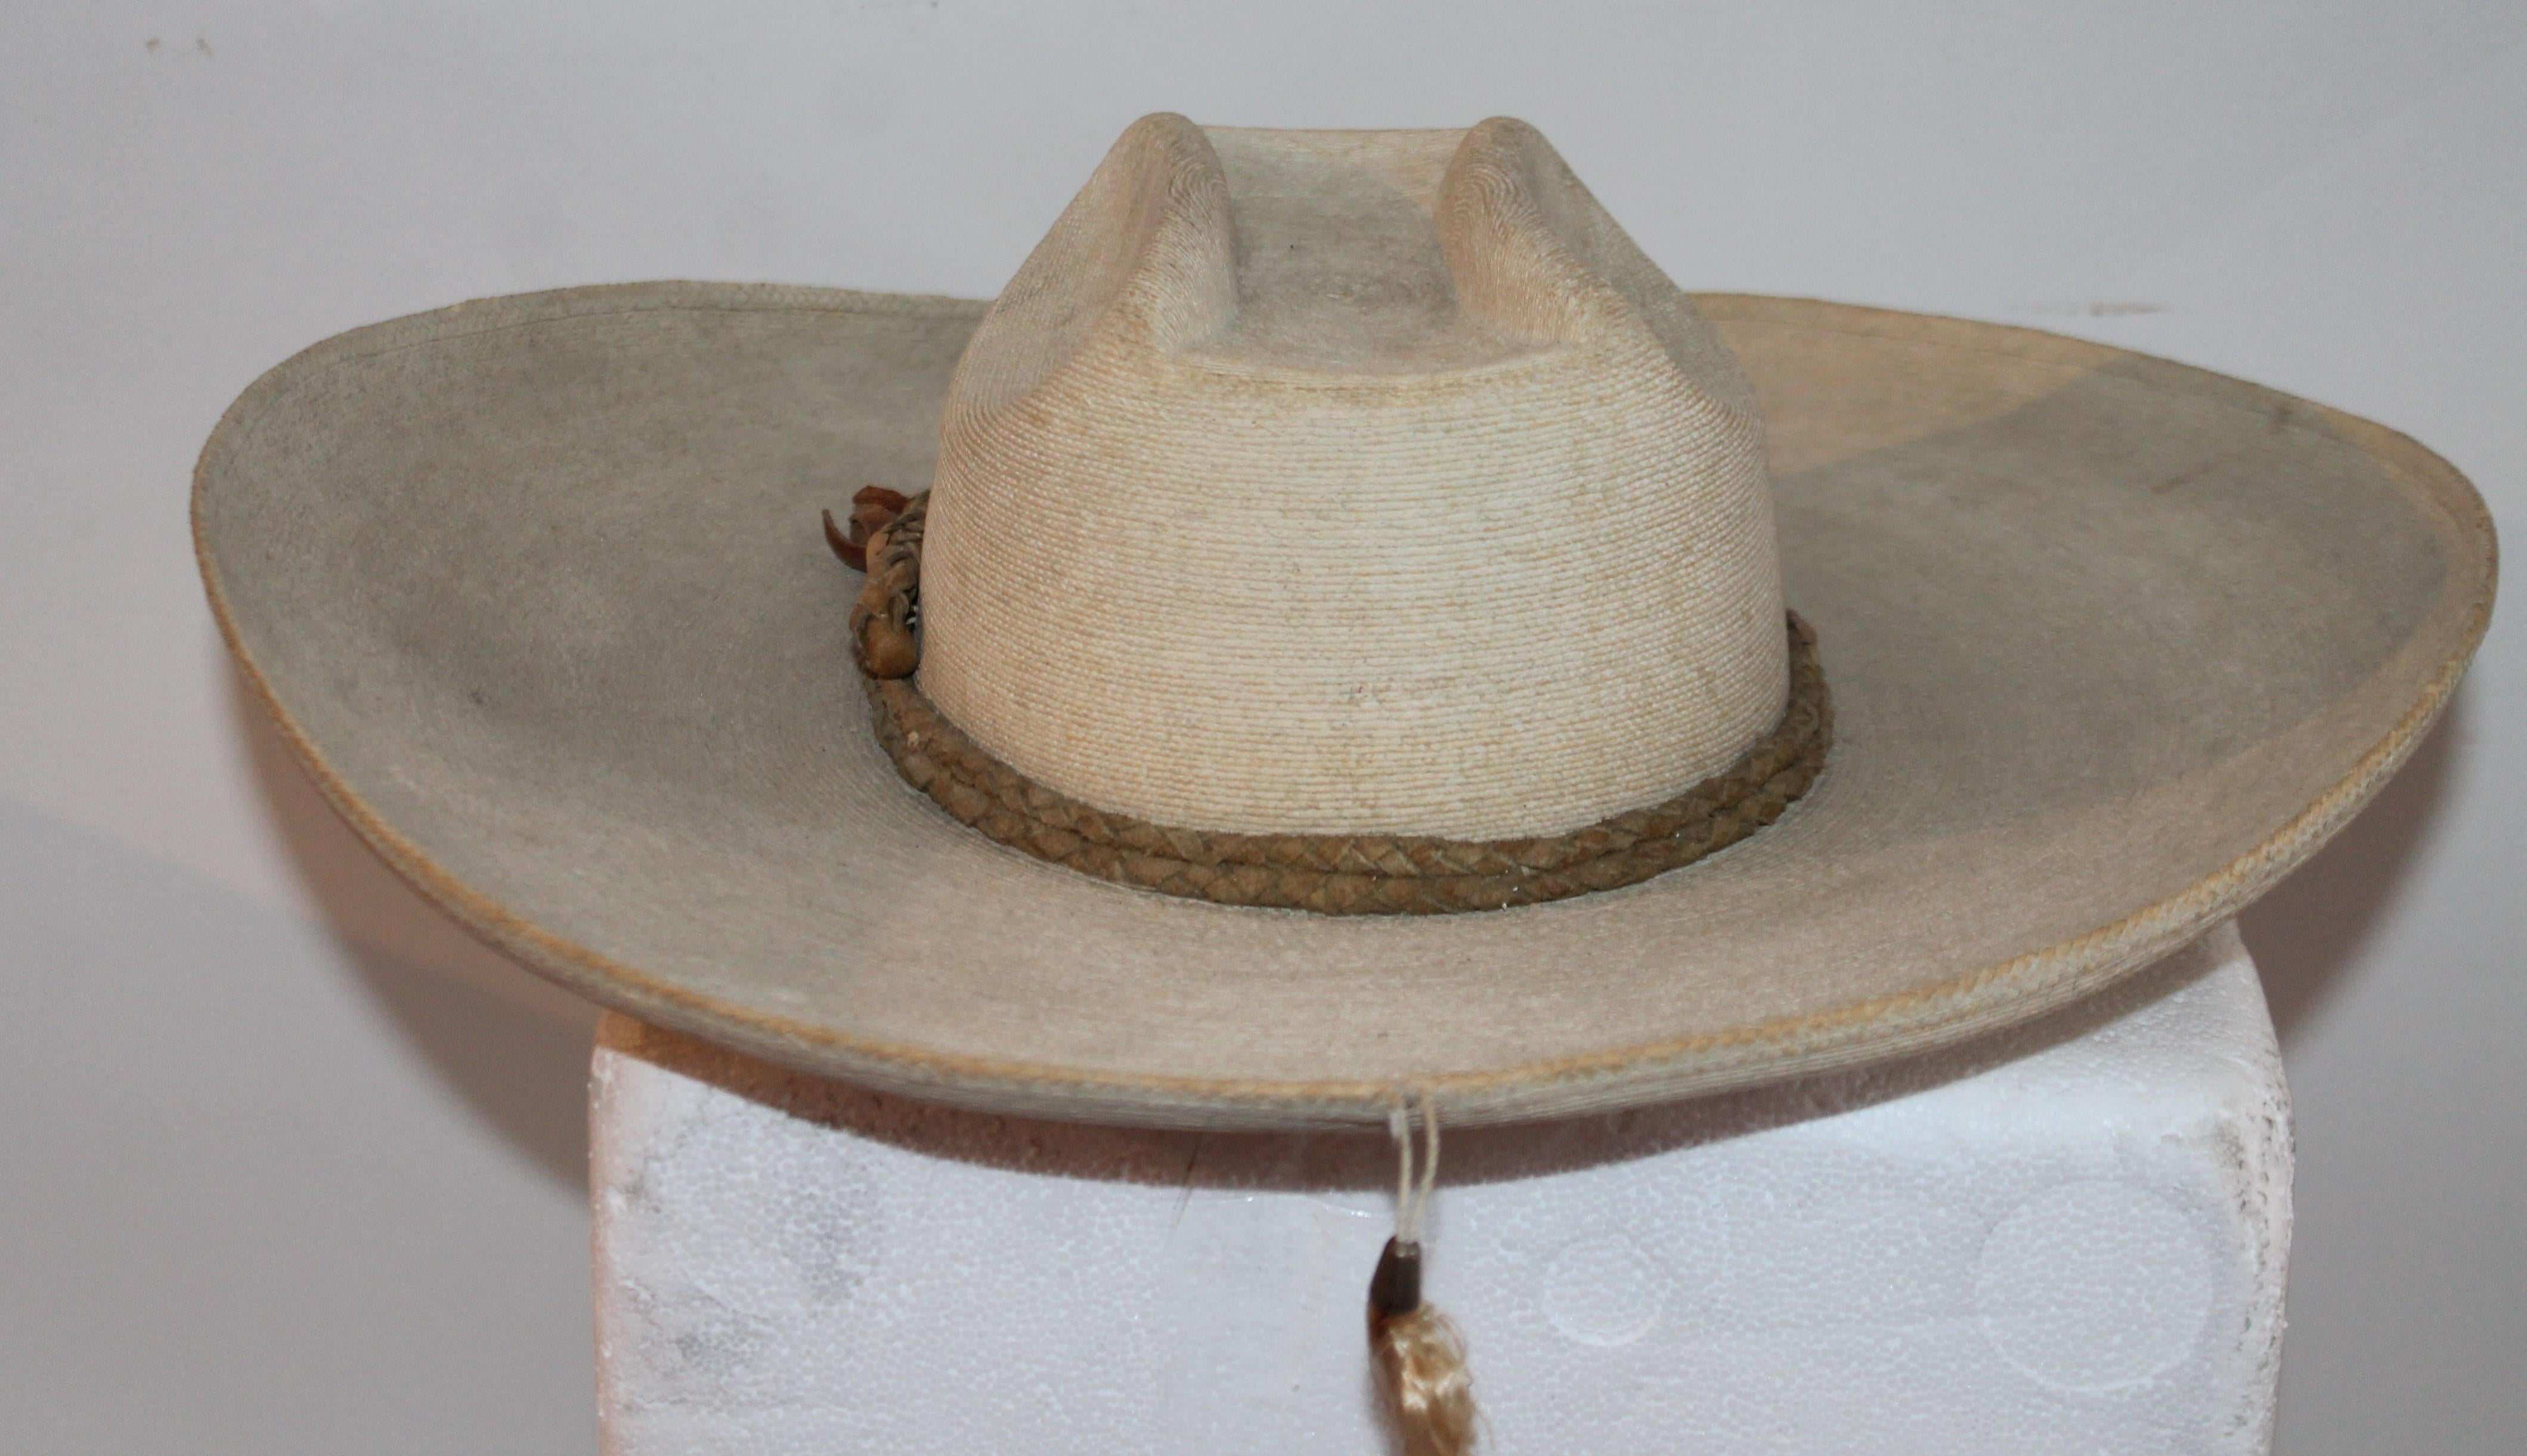 Hand-Crafted Collection of Three Handmade Sombreros